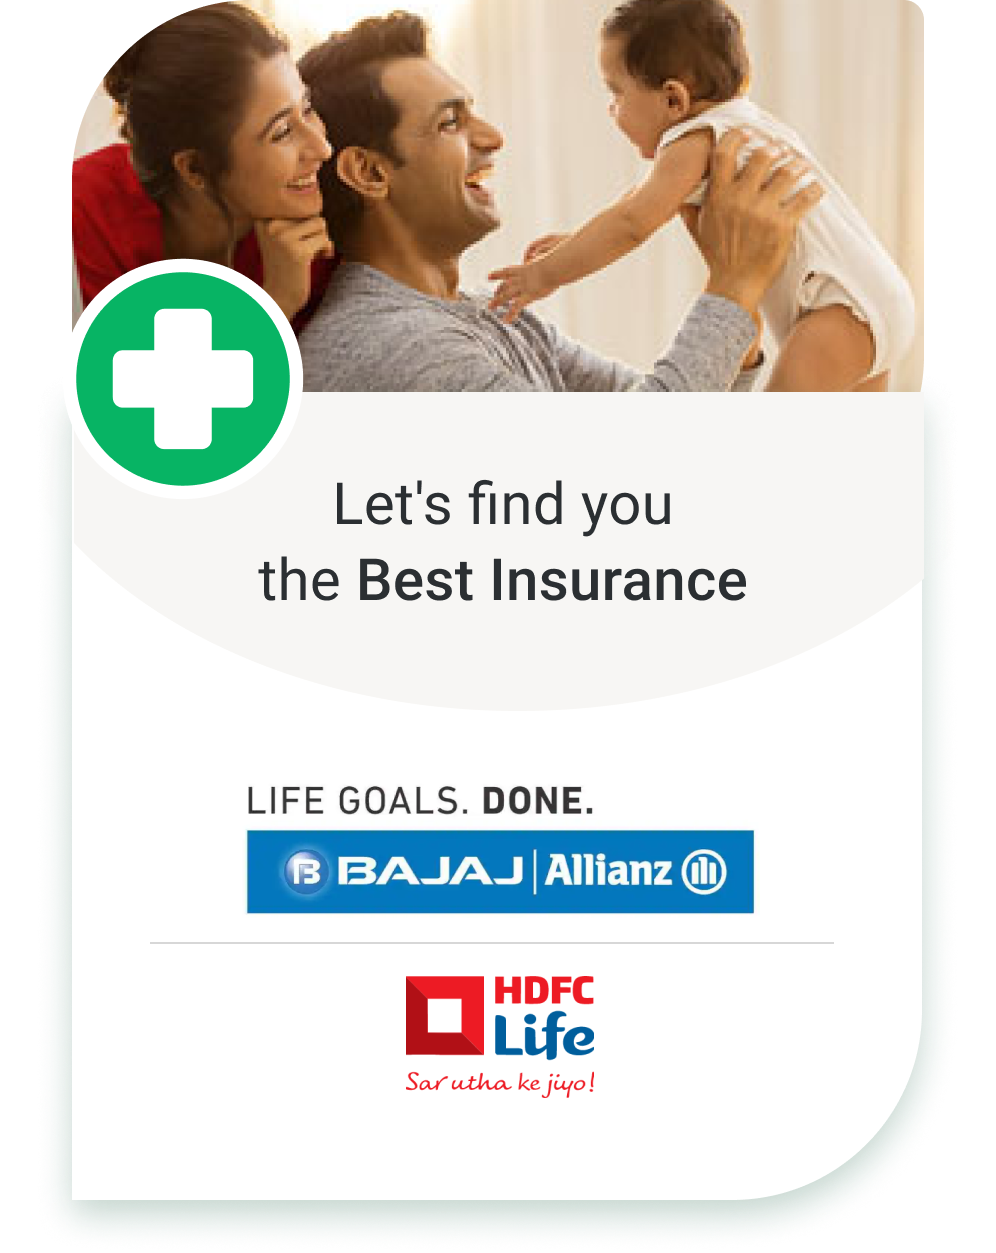 religare student travel insurance